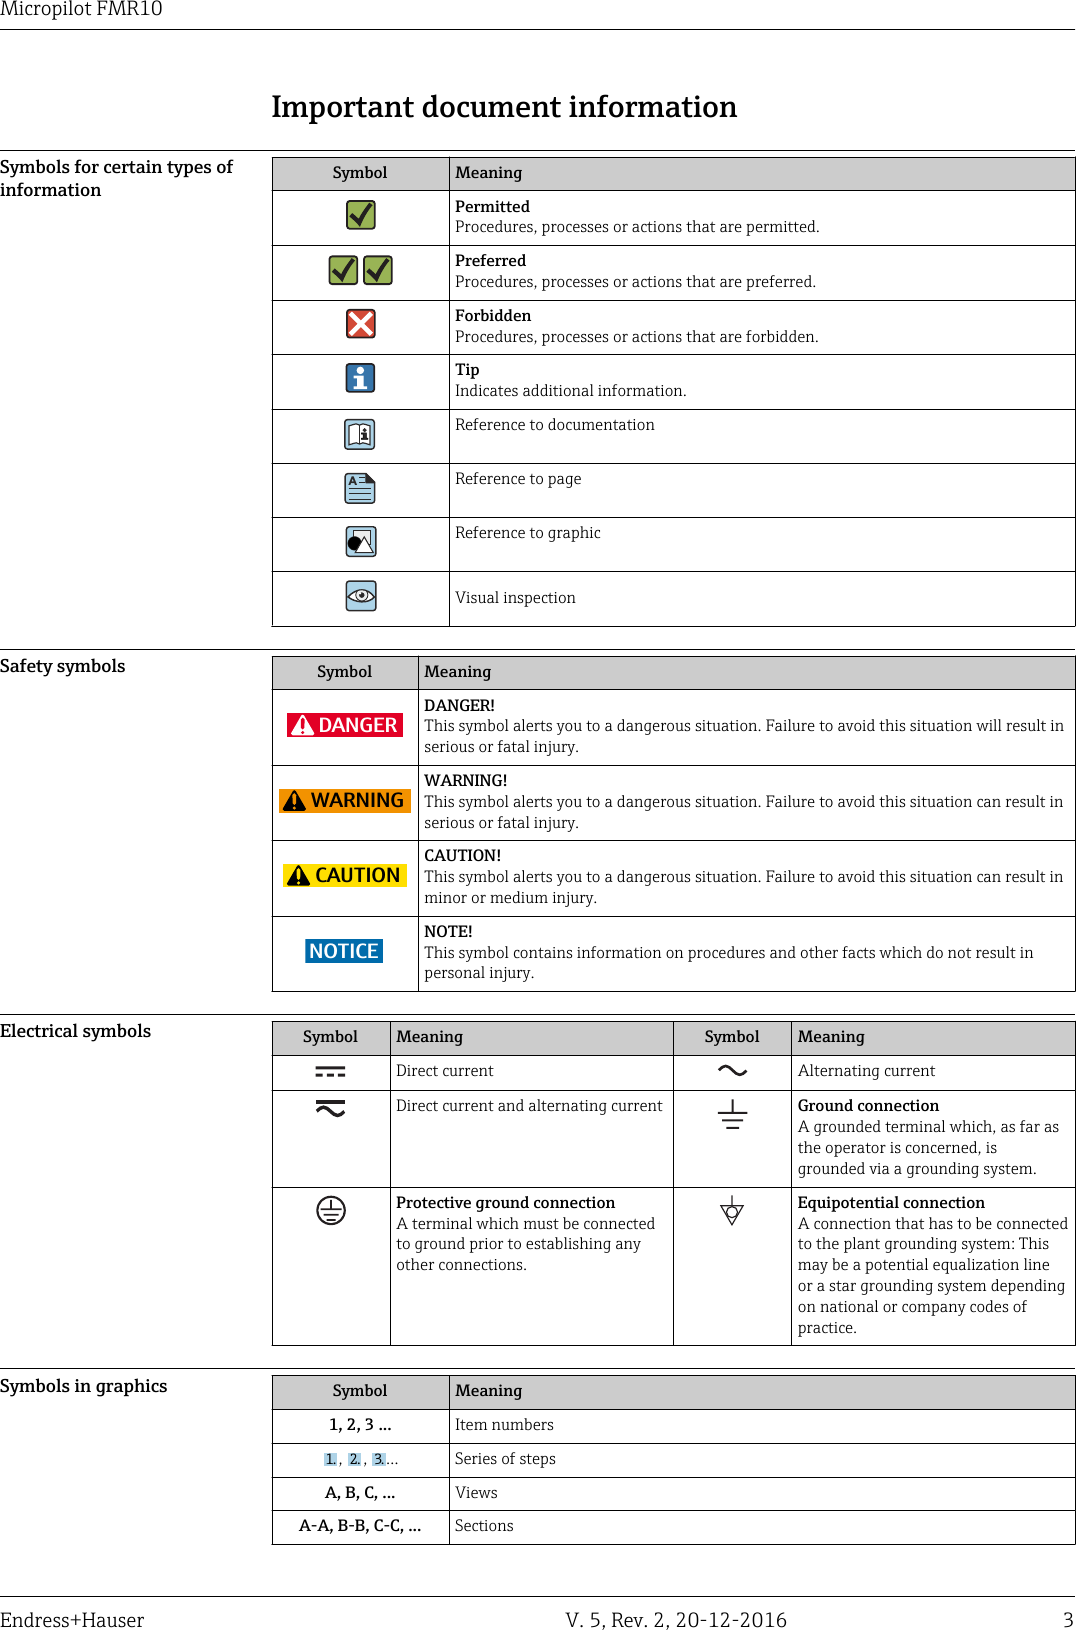 Micropilot FMR10Endress+Hauser V. 5, Rev. 2, 20-12-2016 3Important document informationSymbols for certain types ofinformation Symbol MeaningPermittedProcedures, processes or actions that are permitted.PreferredProcedures, processes or actions that are preferred.ForbiddenProcedures, processes or actions that are forbidden.TipIndicates additional information.Reference to documentationAReference to pageReference to graphicVisual inspectionSafety symbols Symbol MeaningDANGERDANGER!This symbol alerts you to a dangerous situation. Failure to avoid this situation will result inserious or fatal injury.WARNINGWARNING!This symbol alerts you to a dangerous situation. Failure to avoid this situation can result inserious or fatal injury.CAUTIONCAUTION!This symbol alerts you to a dangerous situation. Failure to avoid this situation can result inminor or medium injury.NOTICENOTE!This symbol contains information on procedures and other facts which do not result inpersonal injury.Electrical symbols Symbol Meaning Symbol MeaningDirect current Alternating currentDirect current and alternating current Ground connectionA grounded terminal which, as far asthe operator is concerned, isgrounded via a grounding system.Protective ground connectionA terminal which must be connectedto ground prior to establishing anyother connections.Equipotential connectionA connection that has to be connectedto the plant grounding system: Thismay be a potential equalization lineor a star grounding system dependingon national or company codes ofpractice.Symbols in graphics Symbol Meaning1, 2, 3 ... Item numbers1., 2., 3.… Series of stepsA, B, C, ... ViewsA-A, B-B, C-C, ... Sections